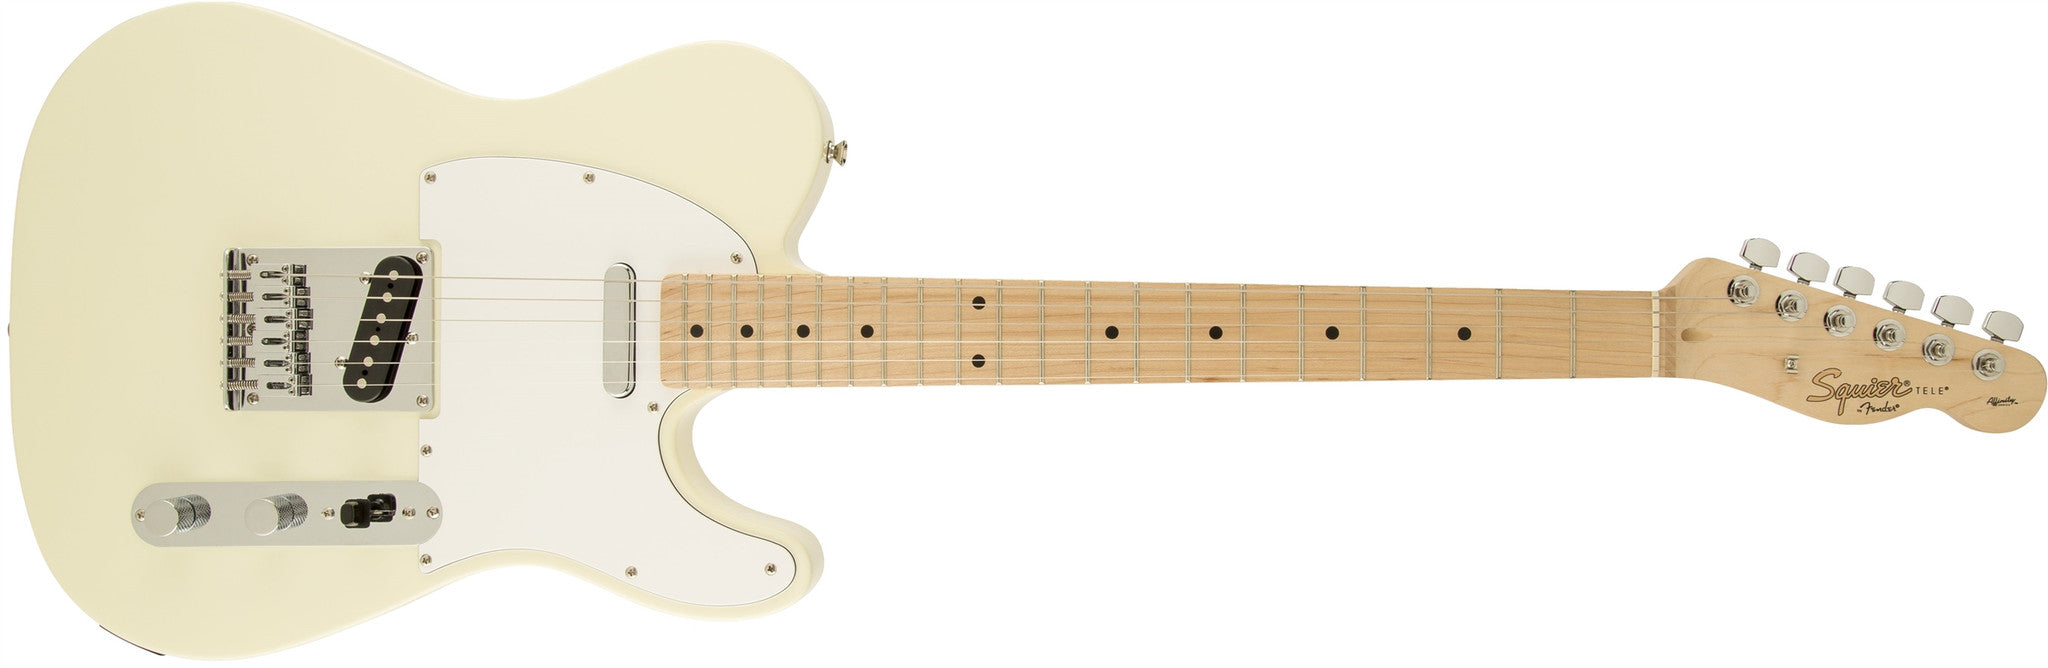 Squier Affinity Series Telecaster, Maple Fingerboard, Arctic White 0310202580